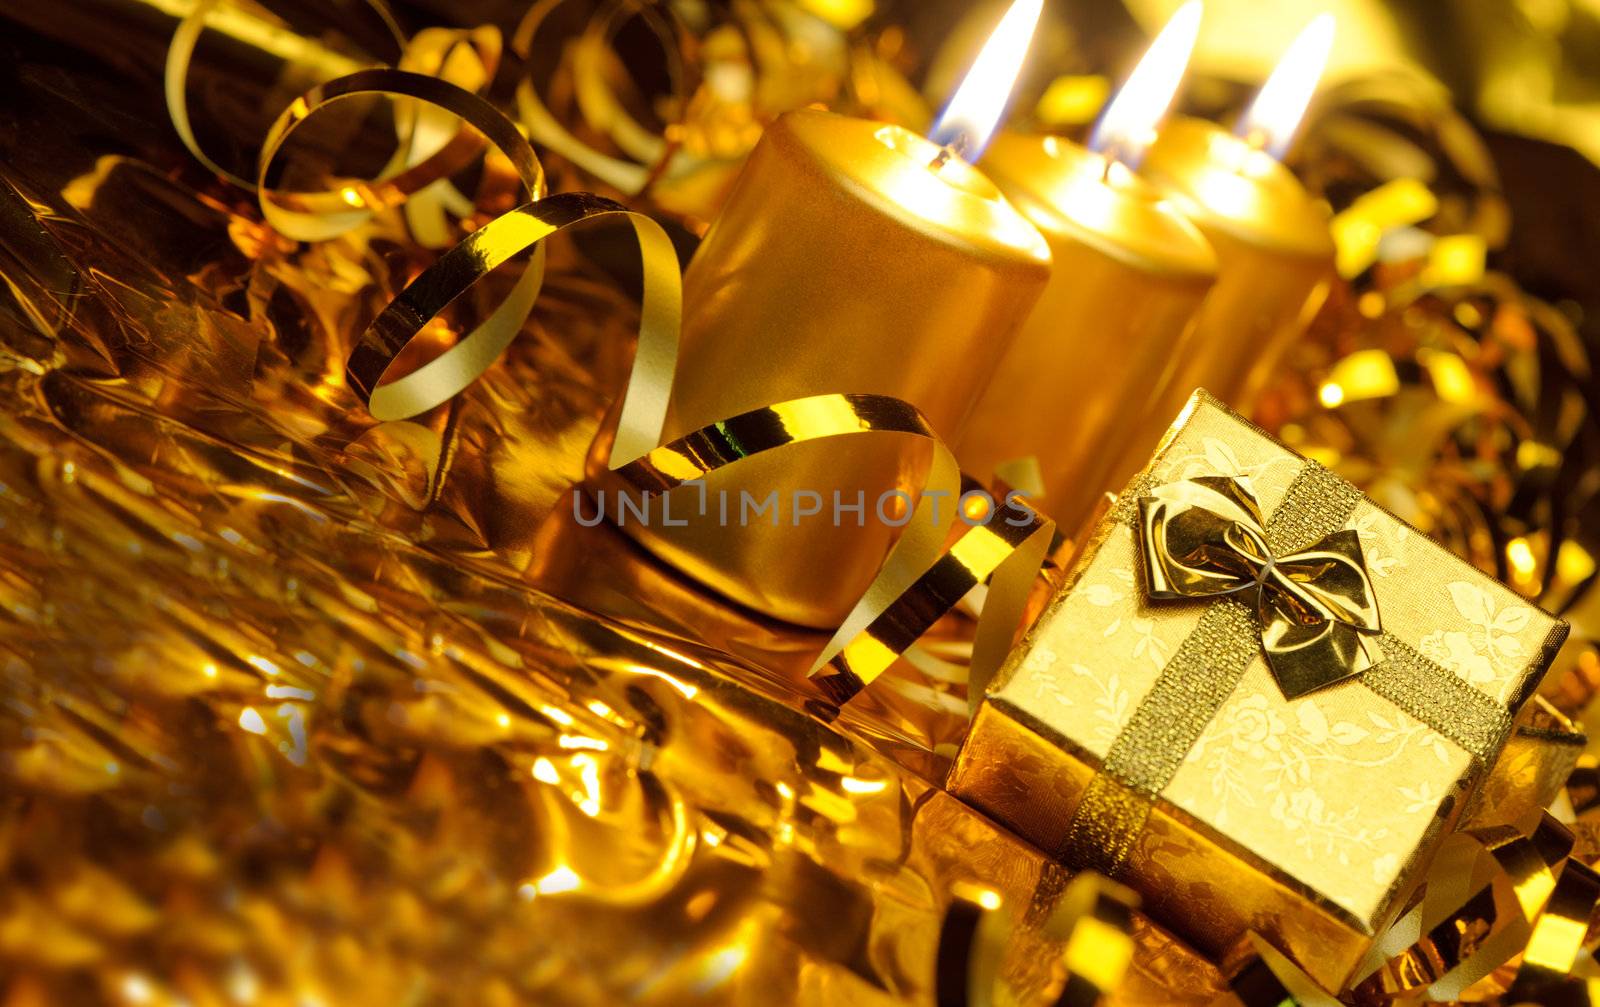 Christmas candles and gift boxes. Gold color